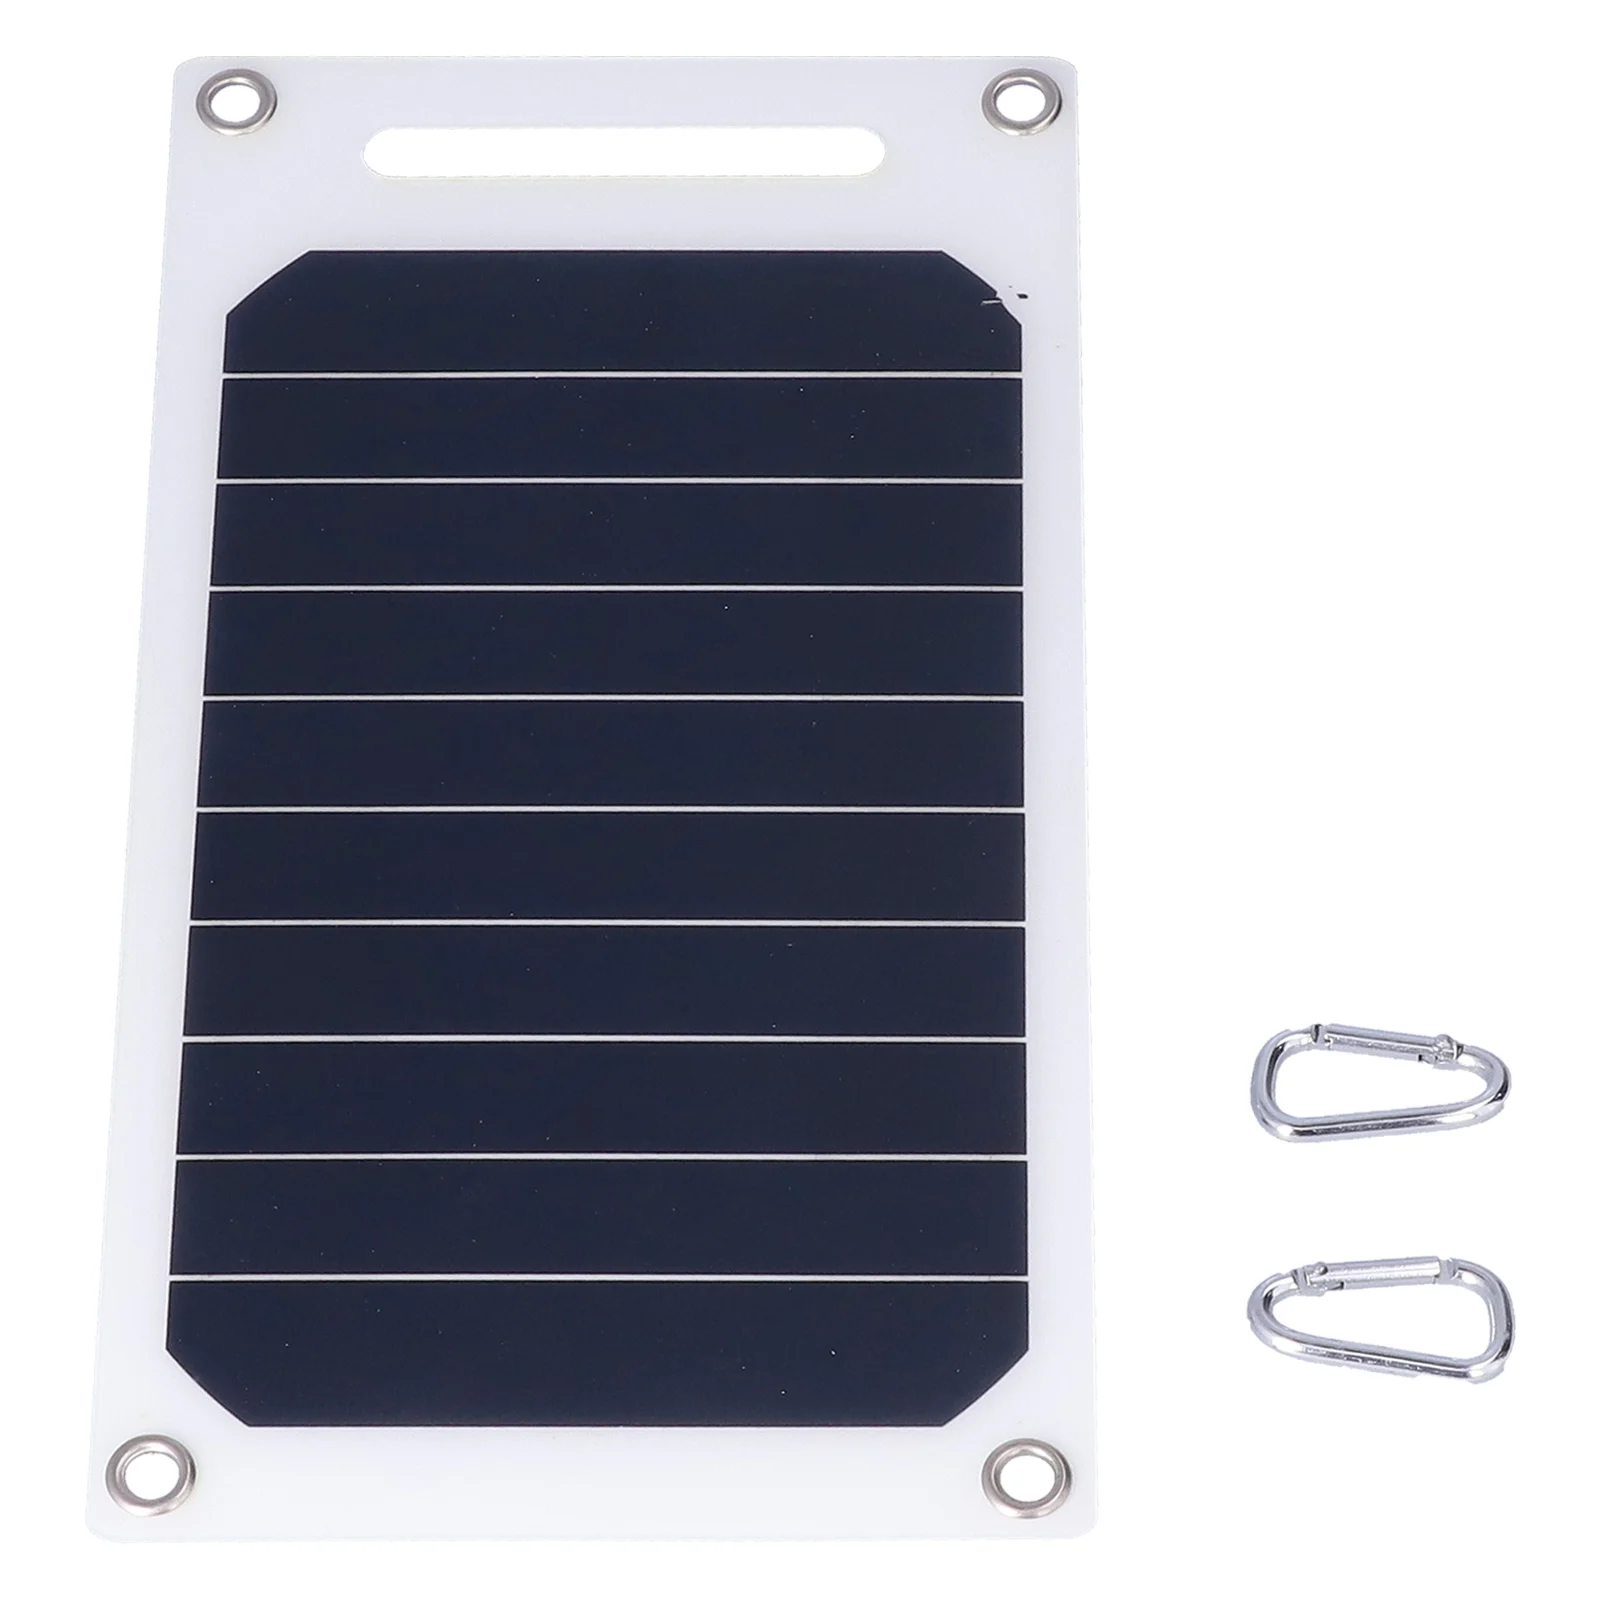 

10W 5V Solar Panel Charger with Buckles Semi Flexible Portable Monocrystalline Solar Charging Tool